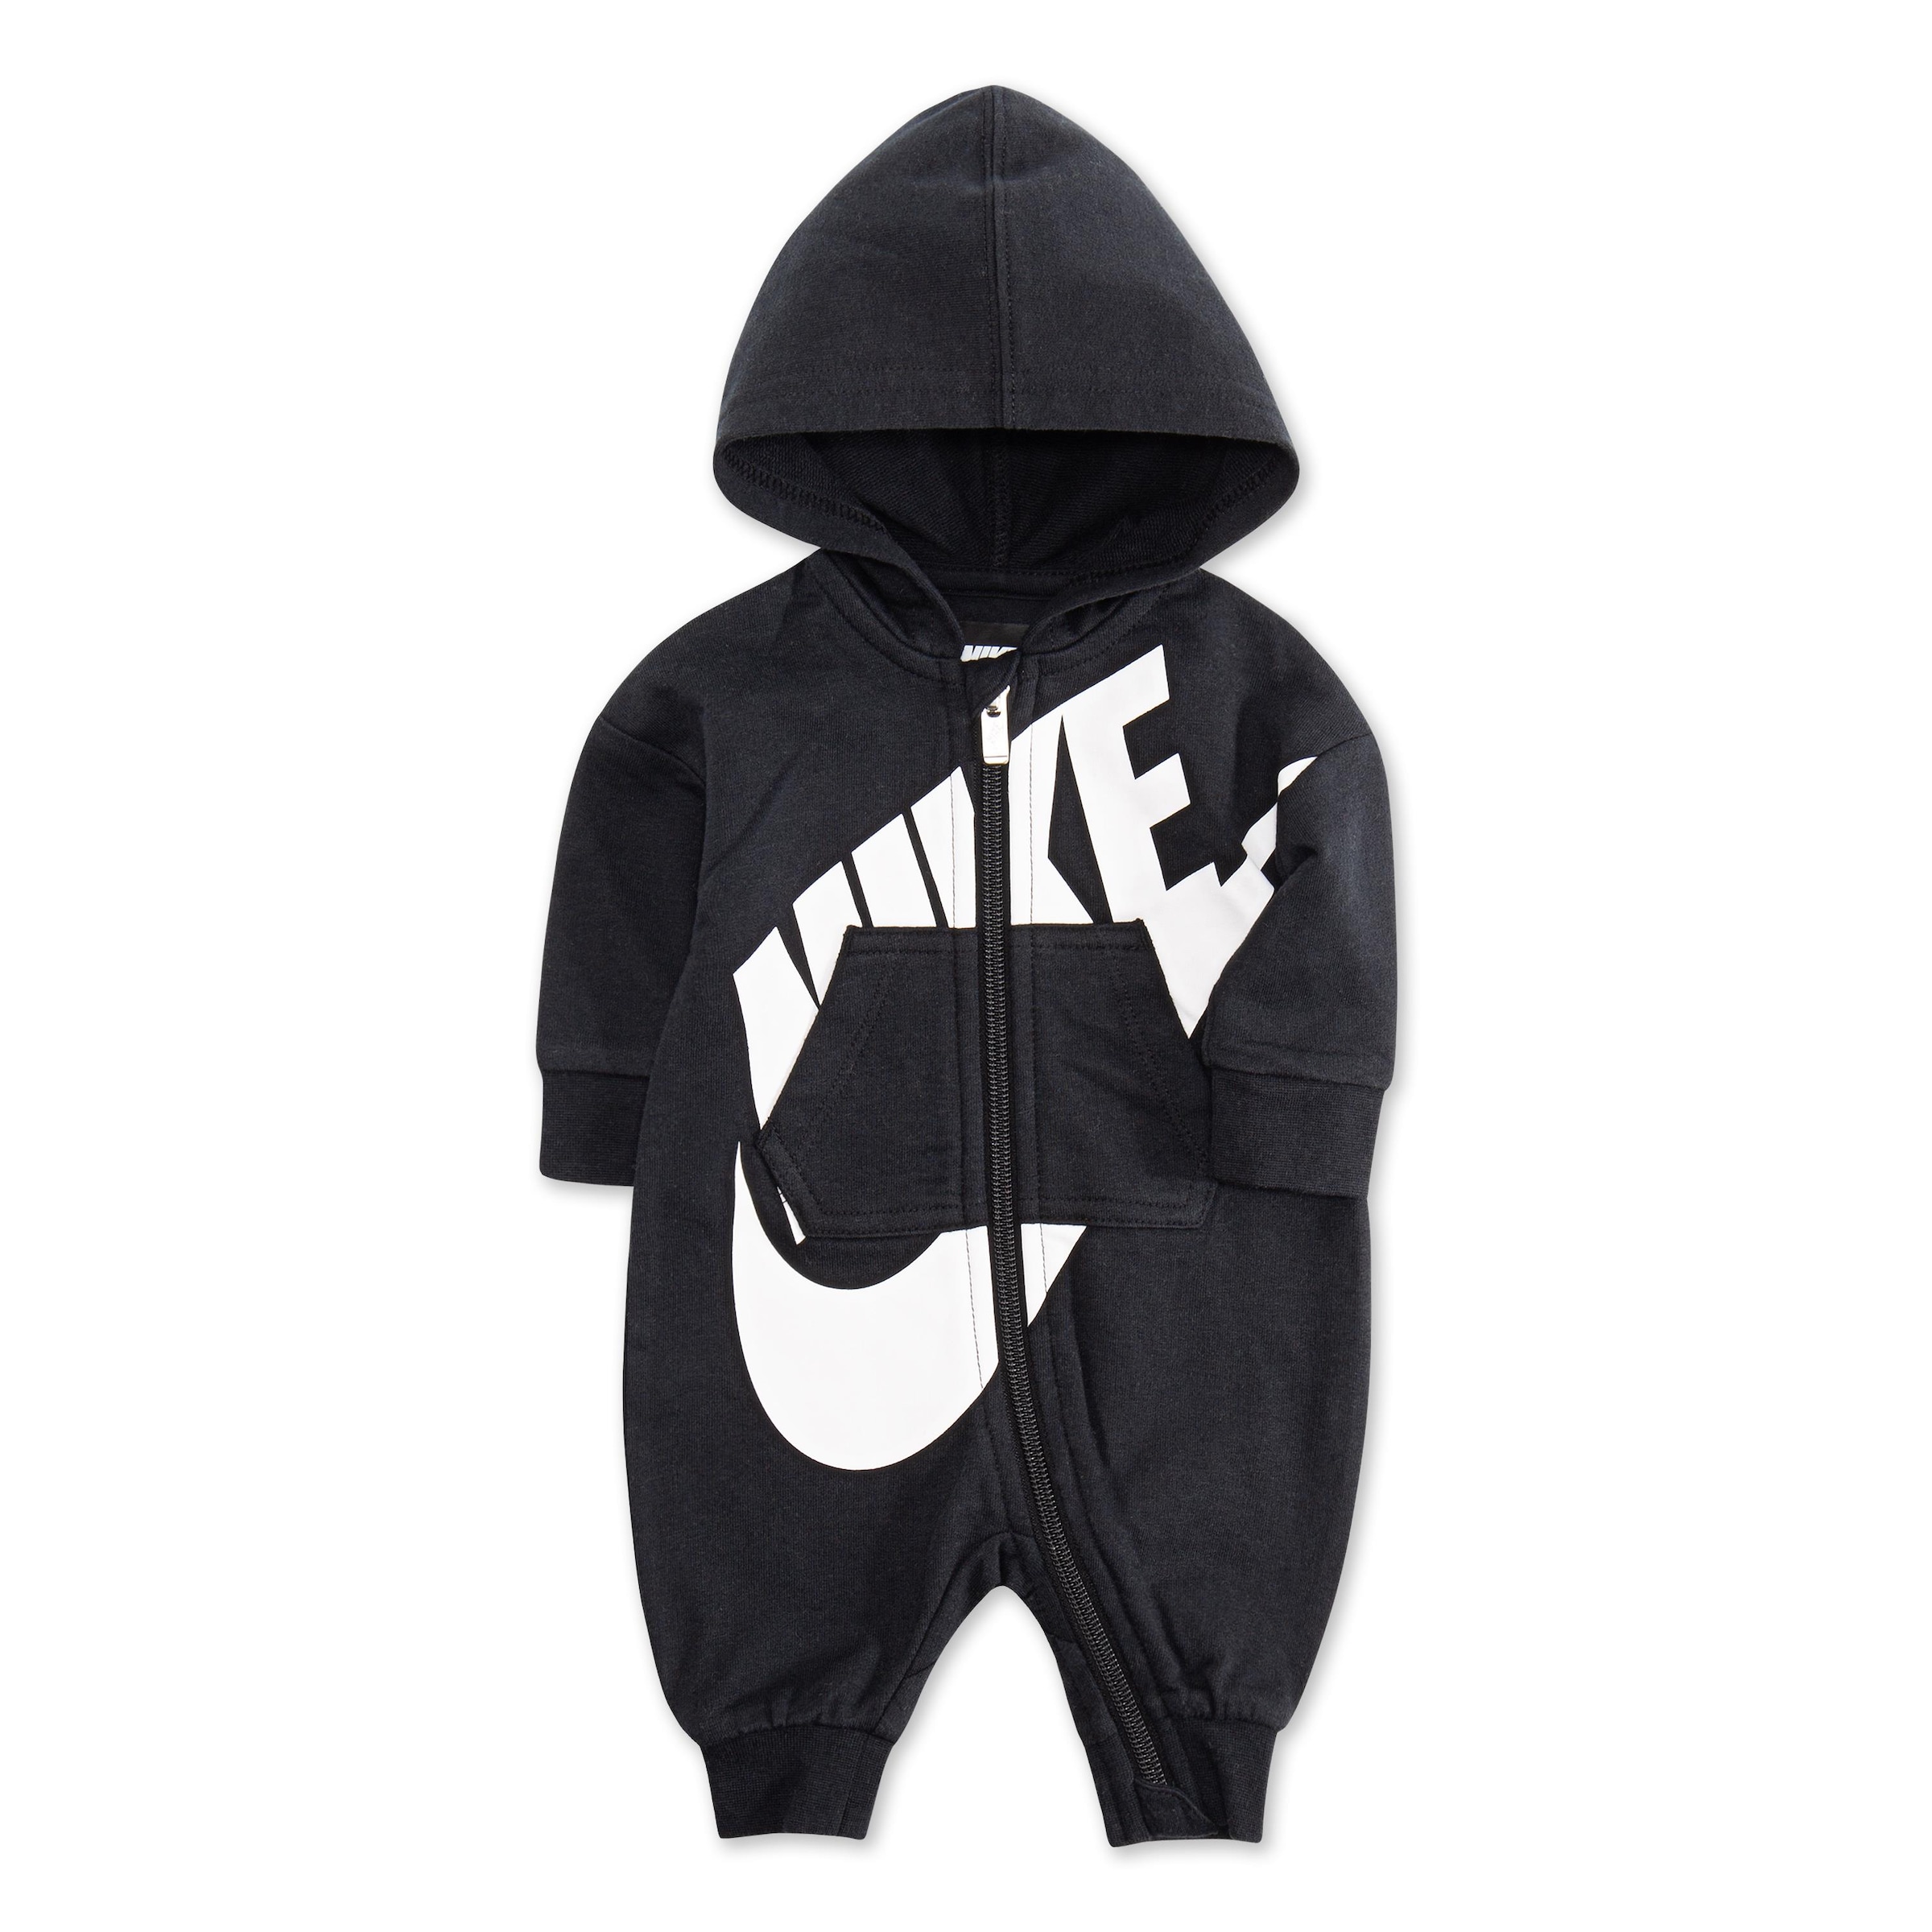 Sportswear OTTO online Nike PLAY ALL »NKN bei COVERALL« DAY Jumpsuit